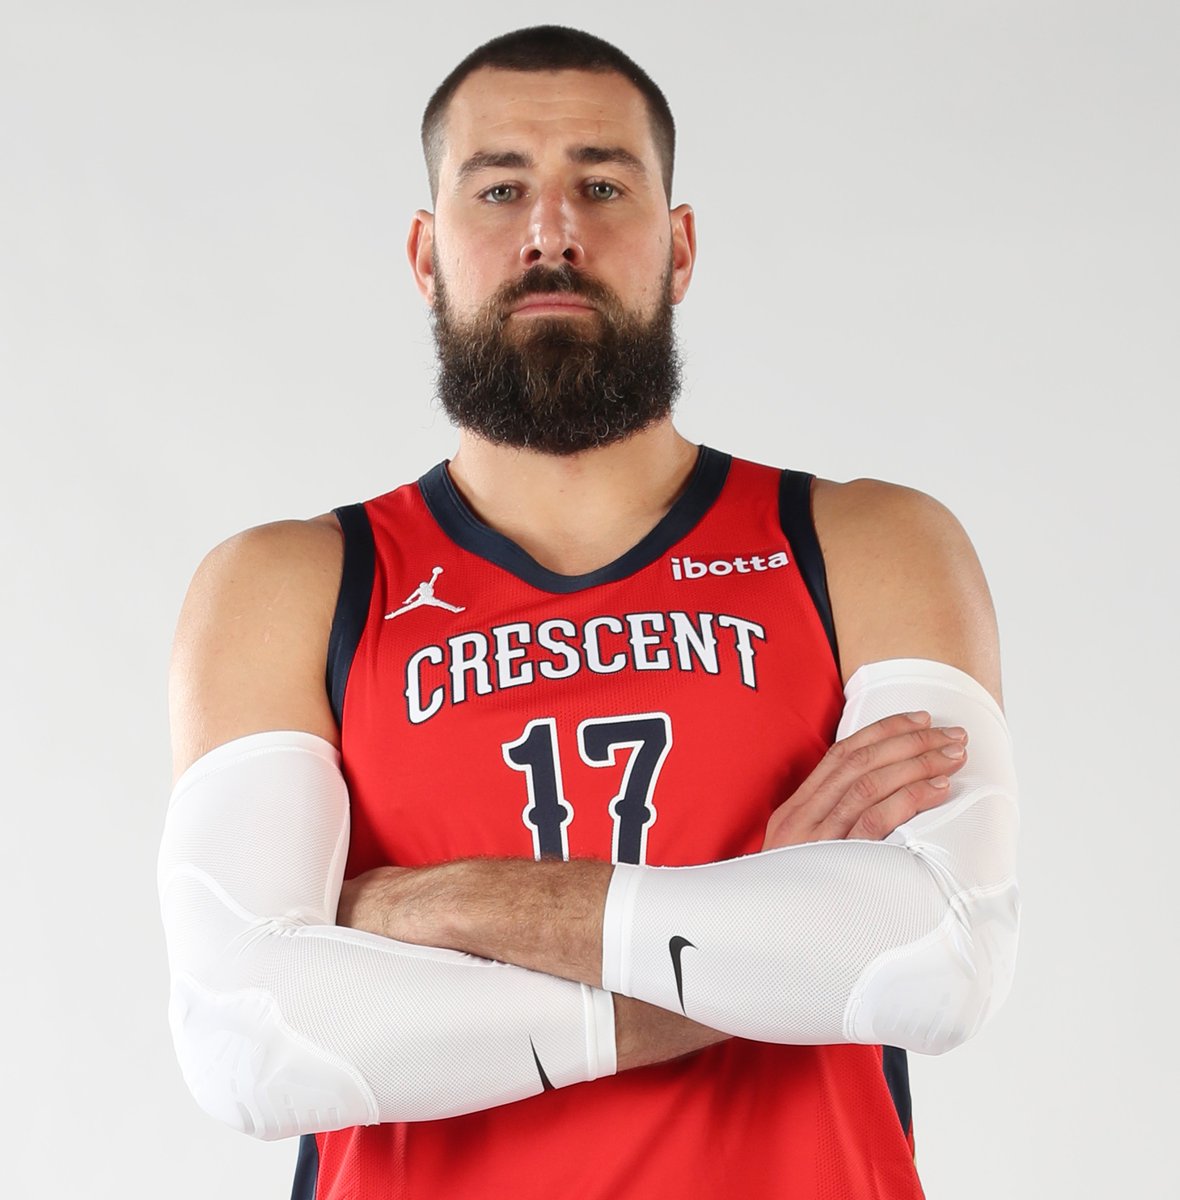 Join us in wishing @JValanciunas of the @PelicansNBA a HAPPY 32nd BIRTHDAY! #NBABDAY